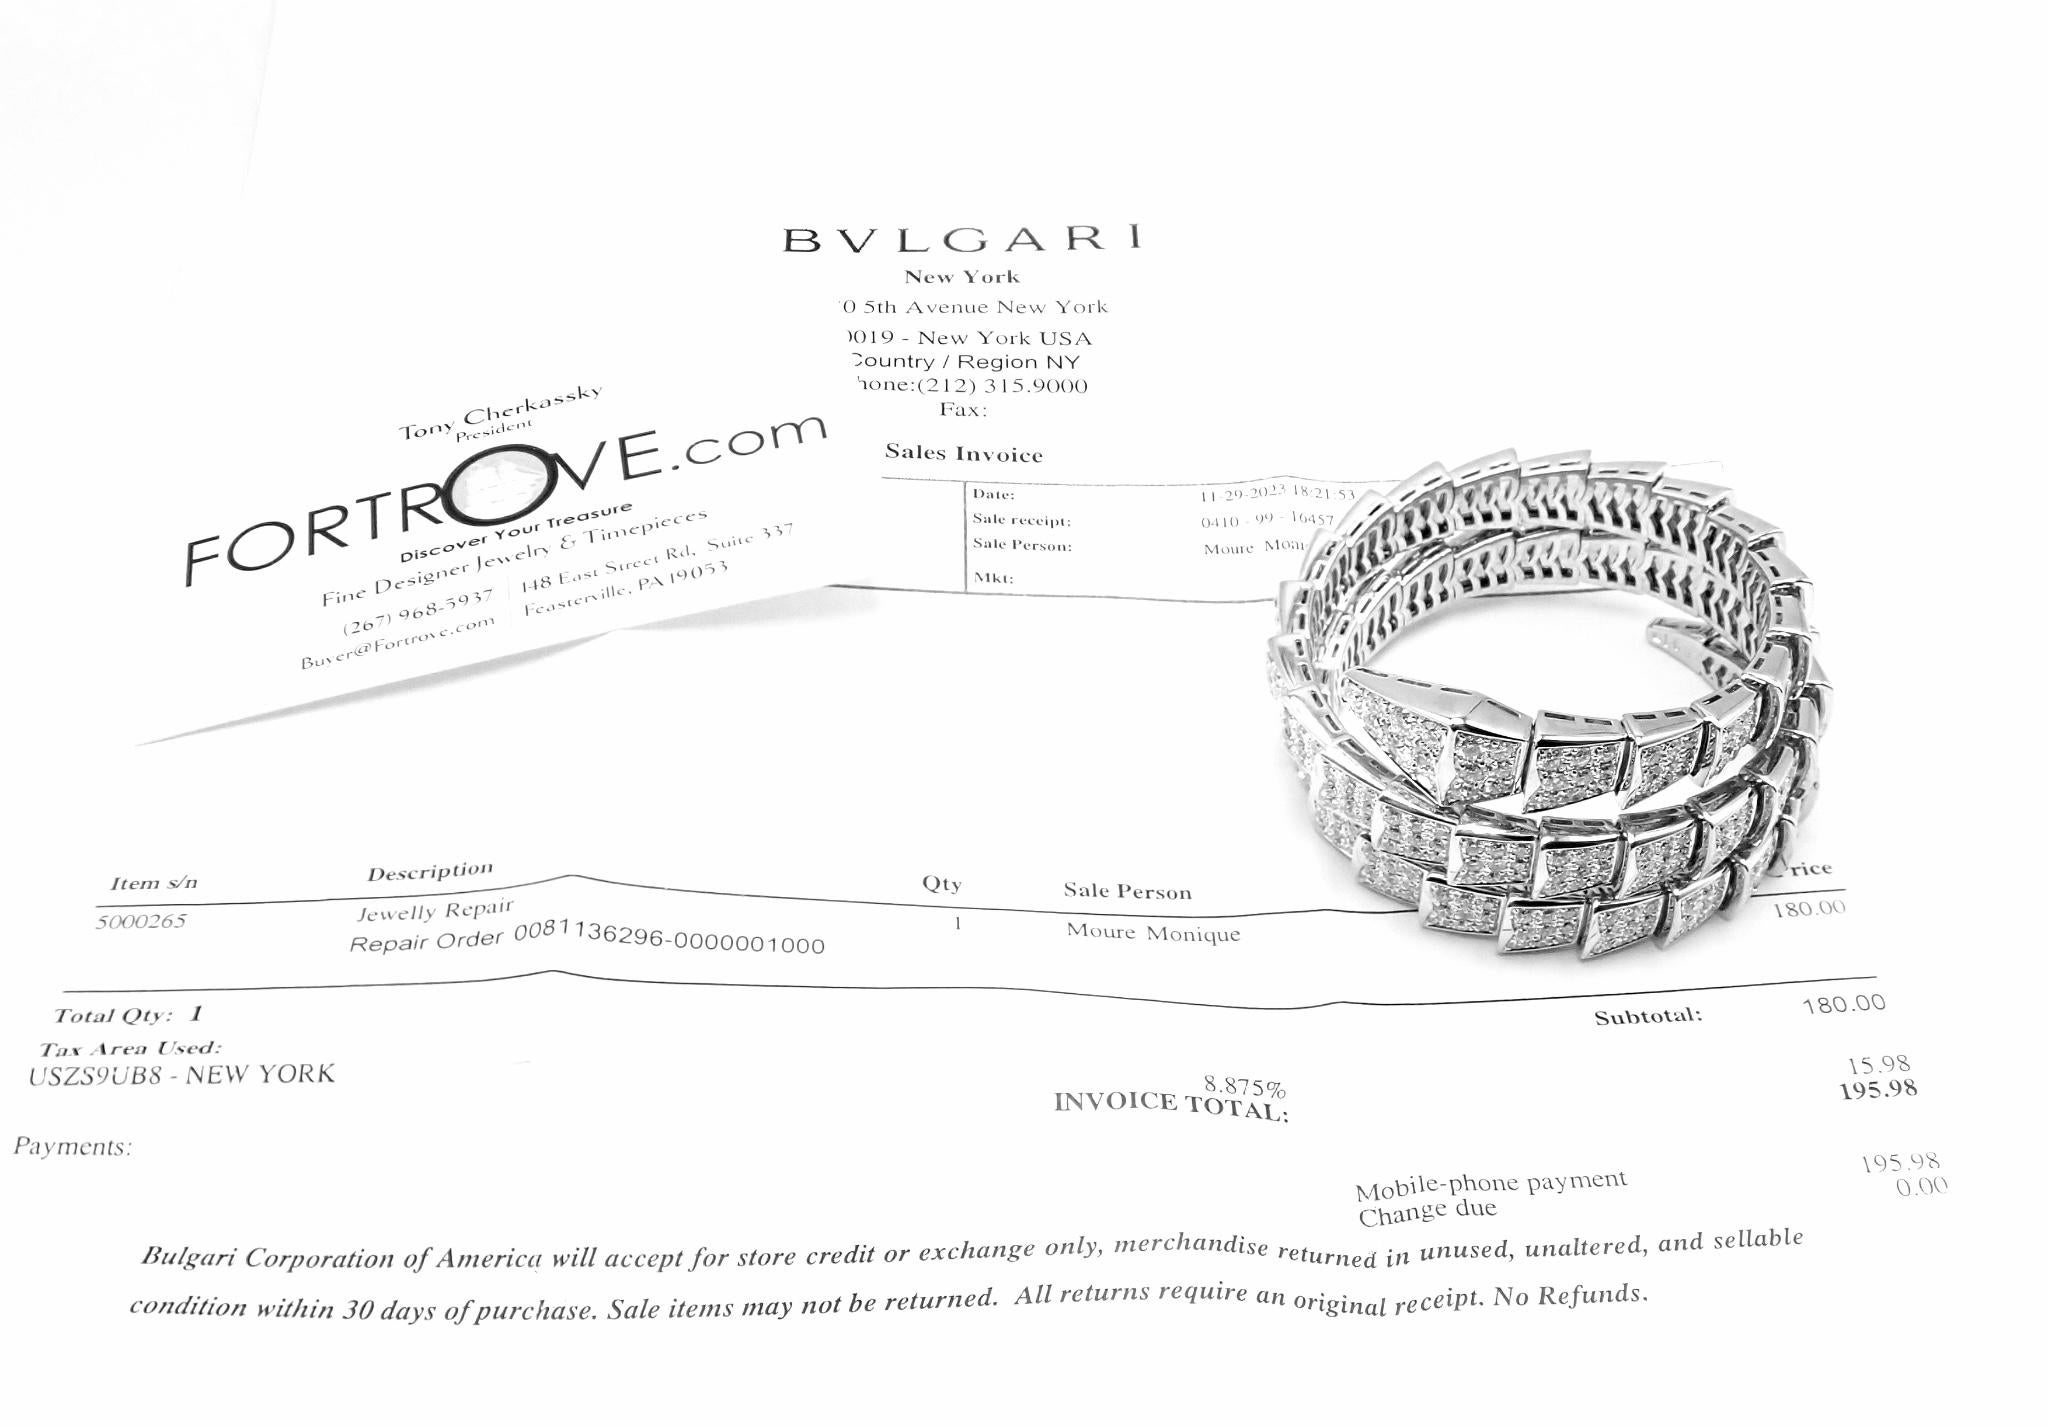 Bulgari Bvlgari Serpenti Viper Snake Two-Coil Diamond  WH Gold Bangle Bracelet In Excellent Condition For Sale In Holland, PA